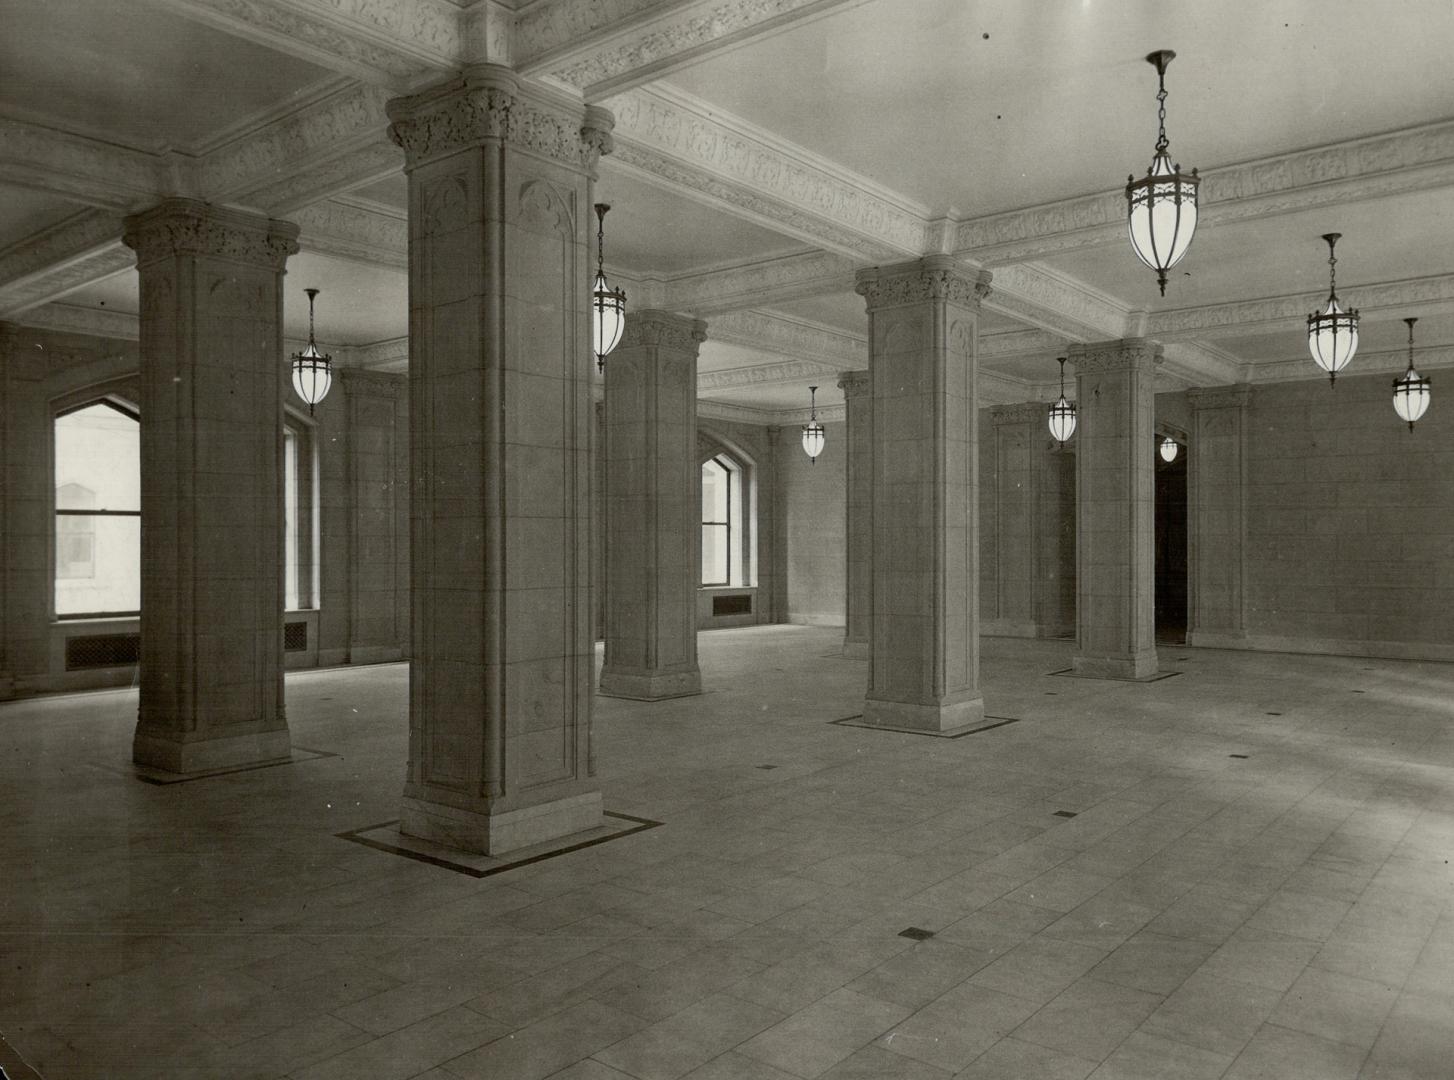 Main entrance hall from the West Door leads into Exhibition Hall